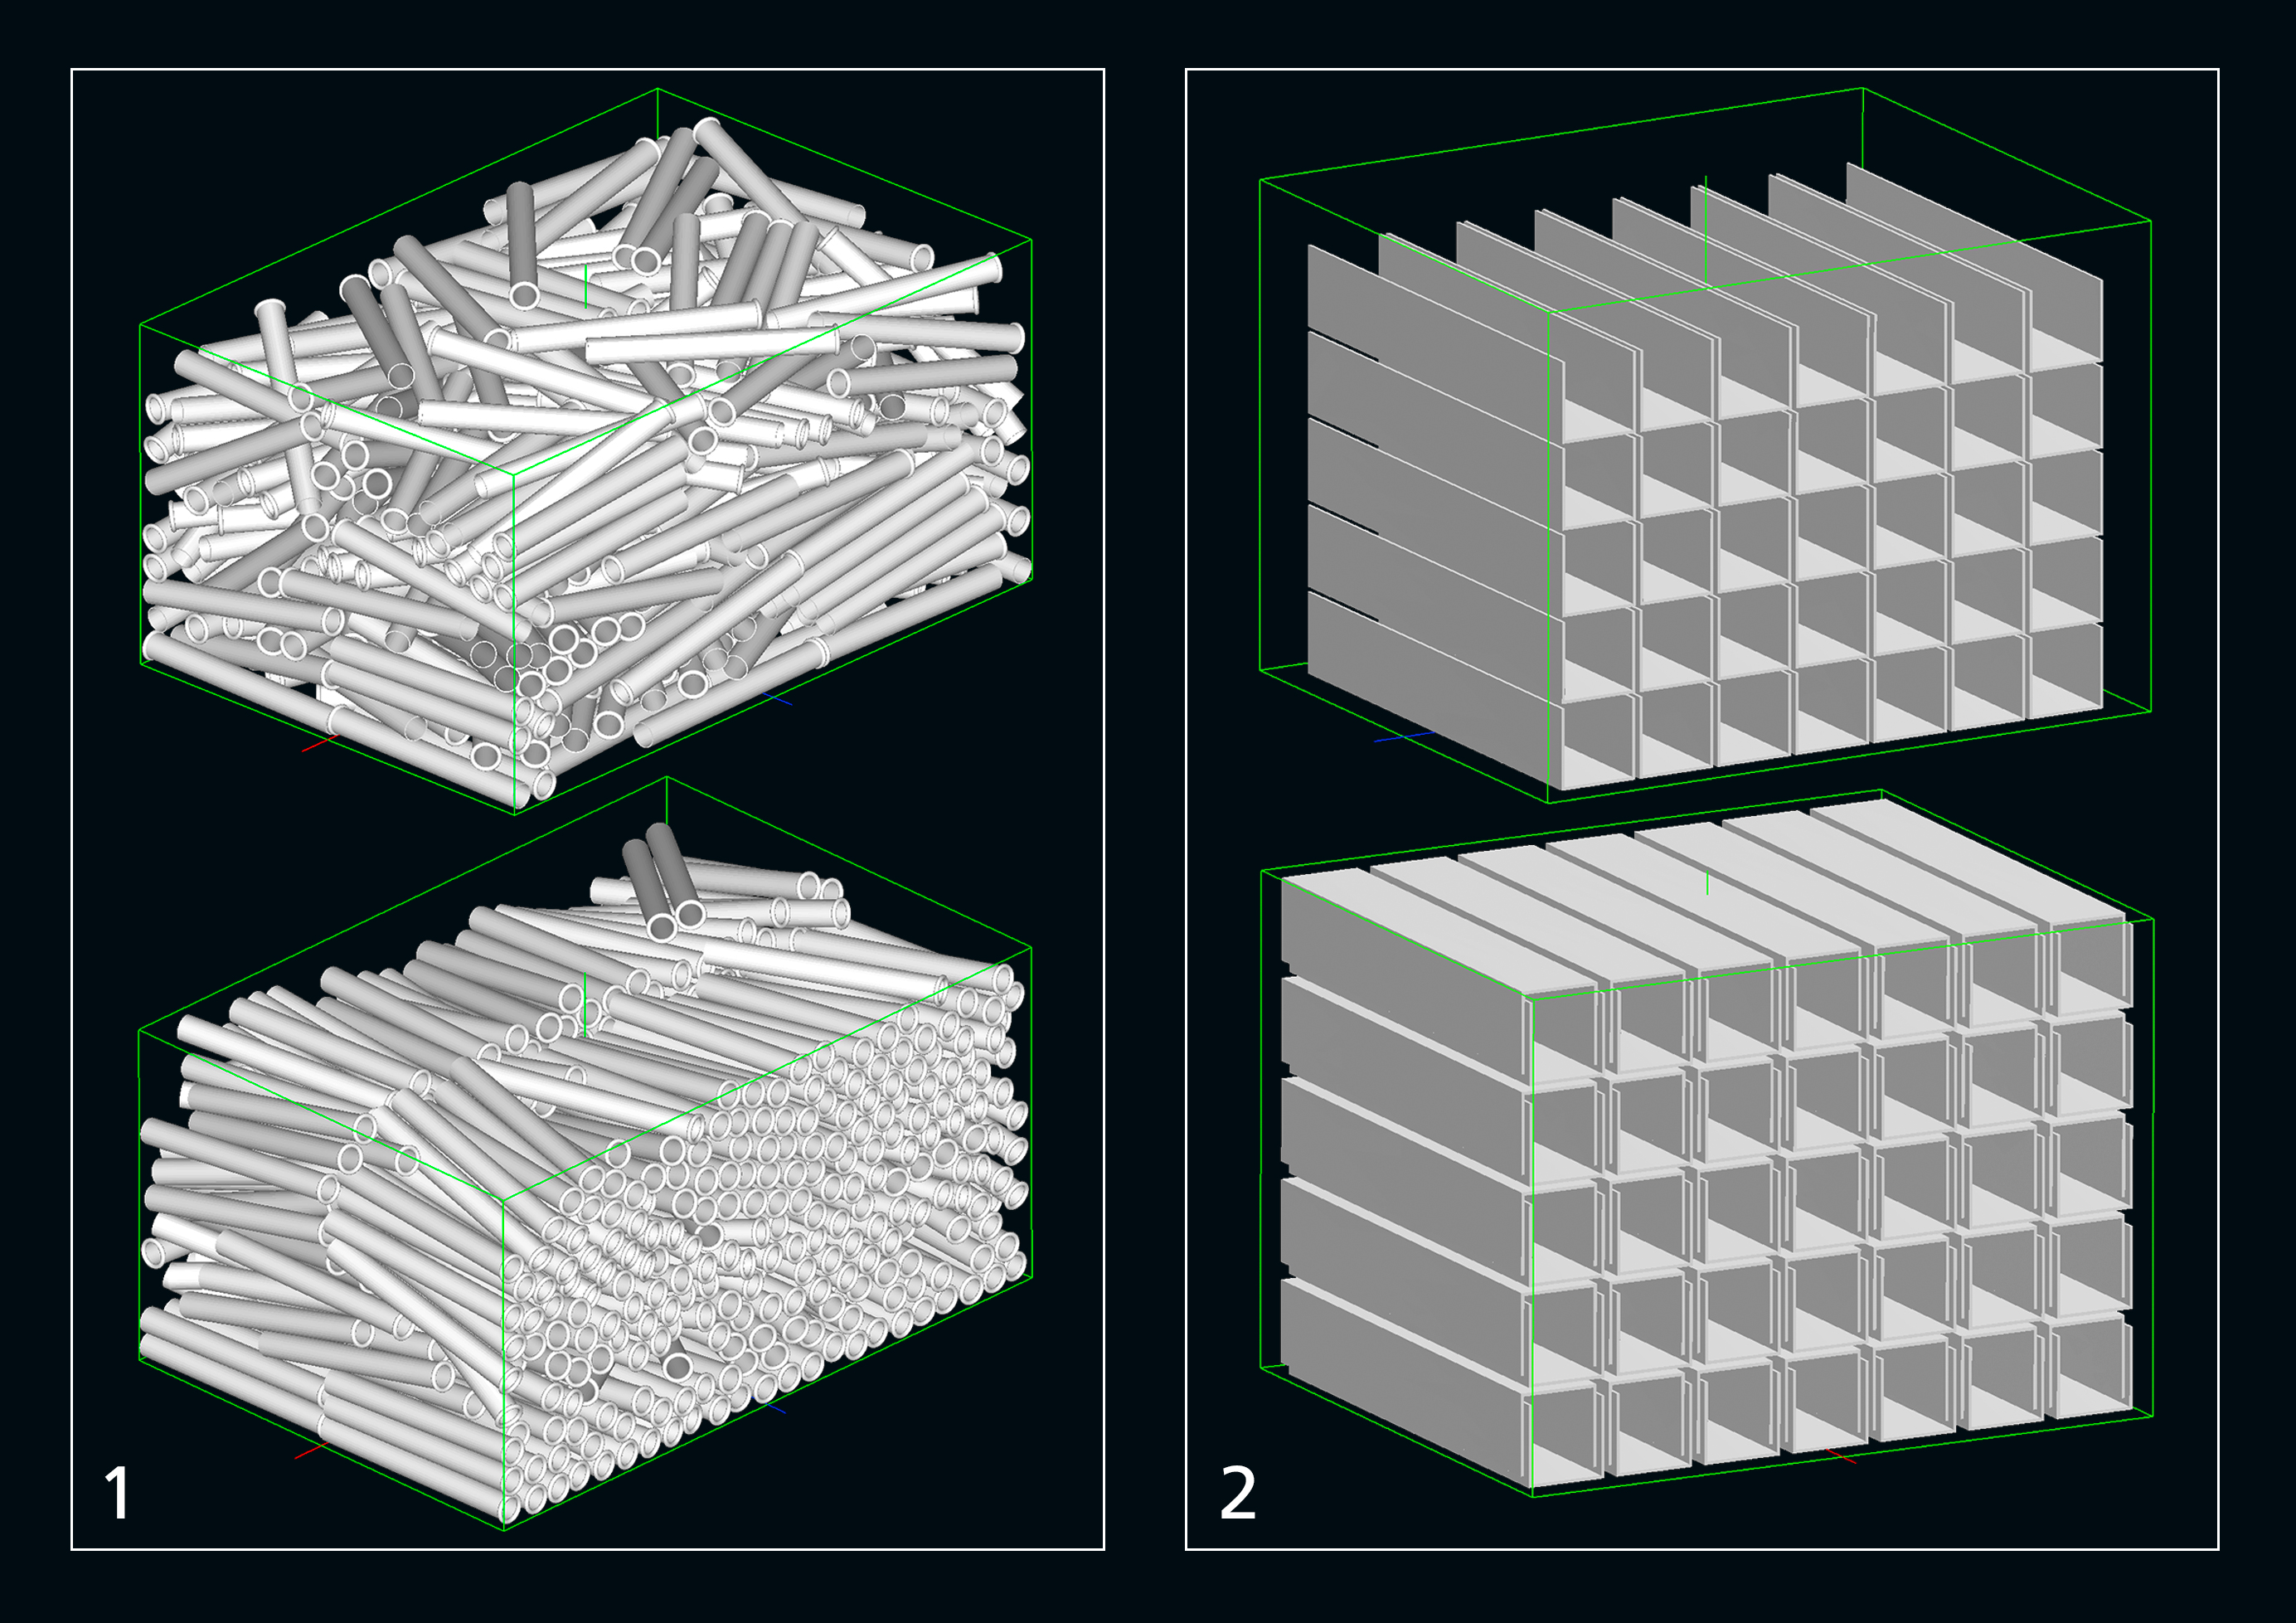 Picture 1: The new version of the software PackAssistant automatically turns every second part upside down. Thus, the container capacity can be increased enormously. Picture 2: Another new feature involves the simulation of bulk material. When a container is filled with long bars a great deal of space is wasted: fewer parts fit into the container than could be achieved if they were all pointing in one direction. With the new PackAssistant version, the user can specify as part of the planning calculation, whether or not the parts should be rotated.